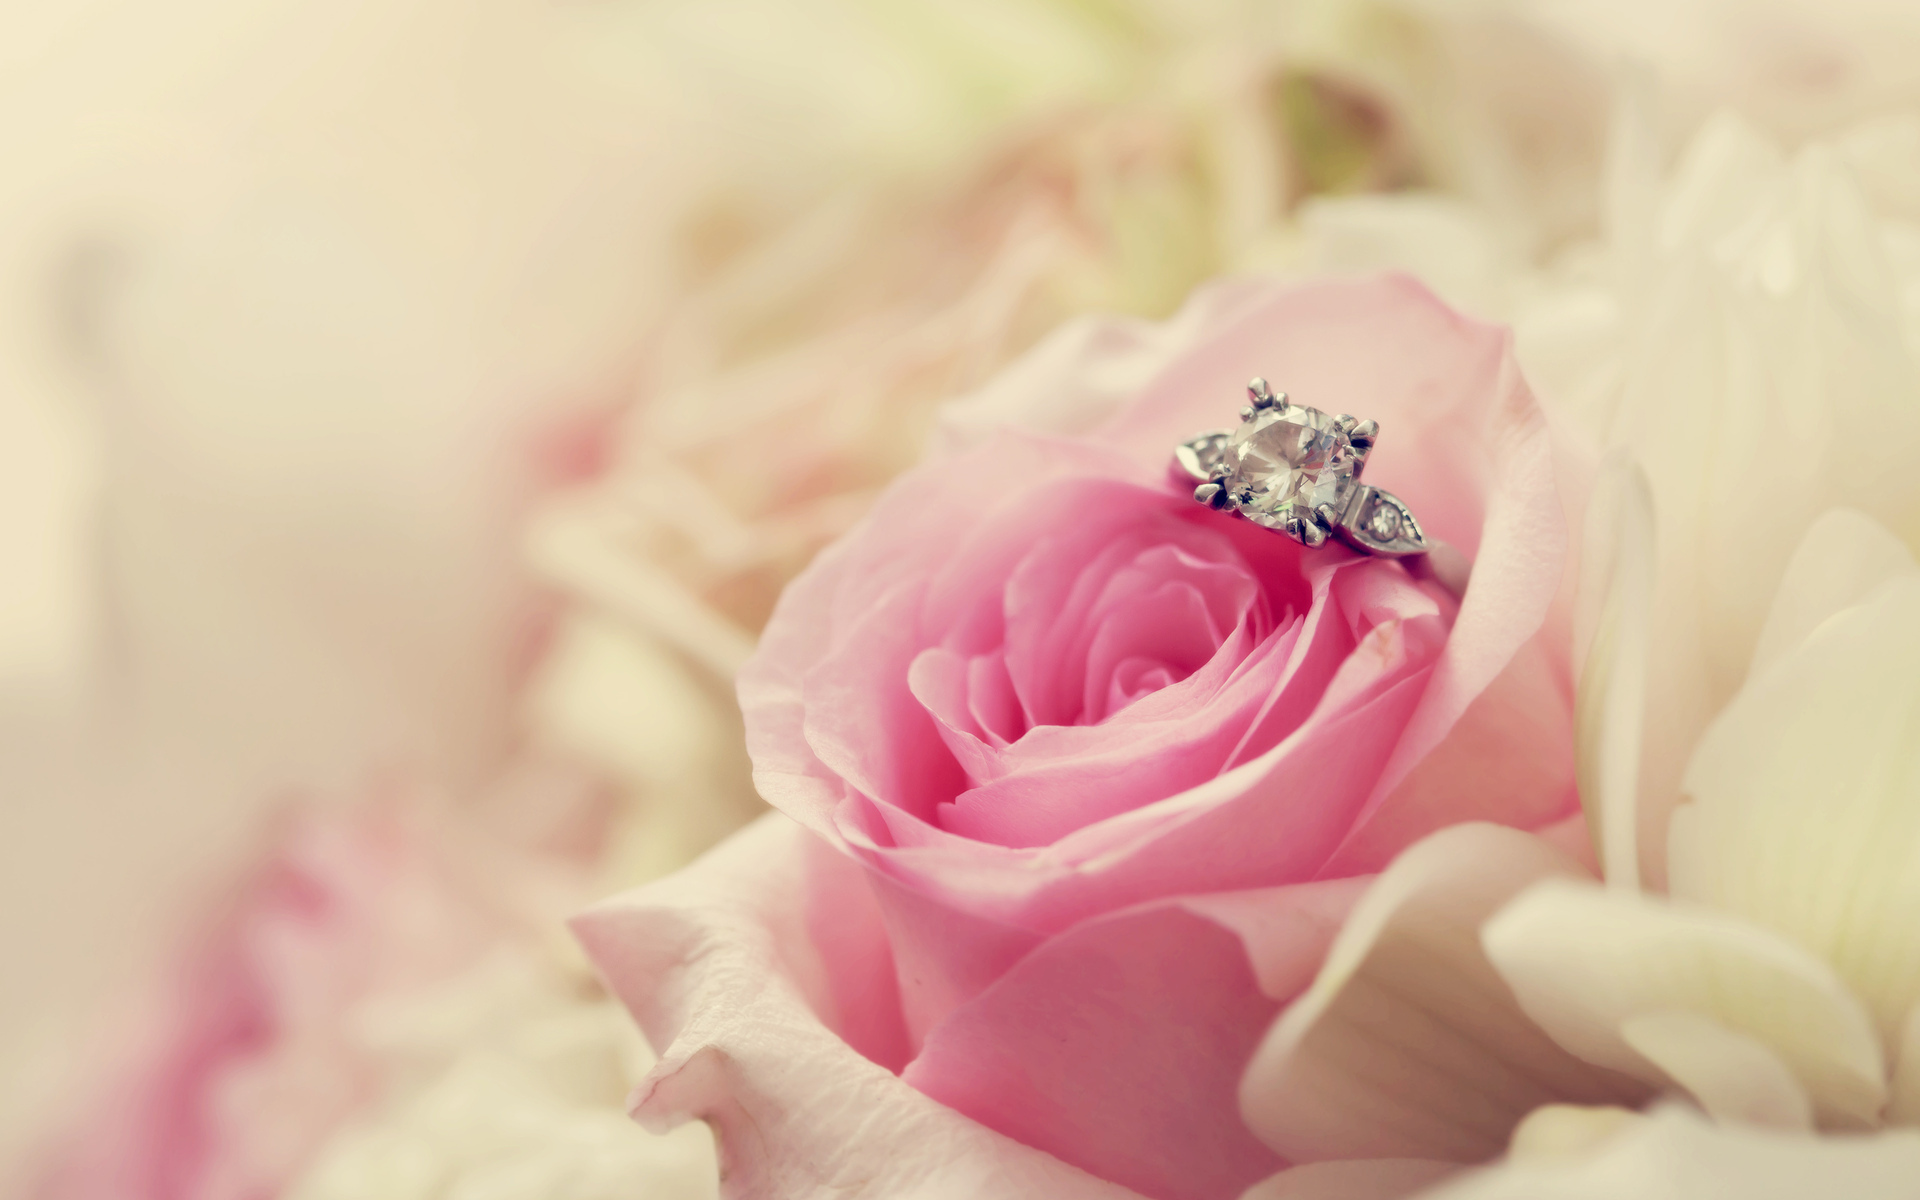 Flower And Ring For Wedding Wallpaper